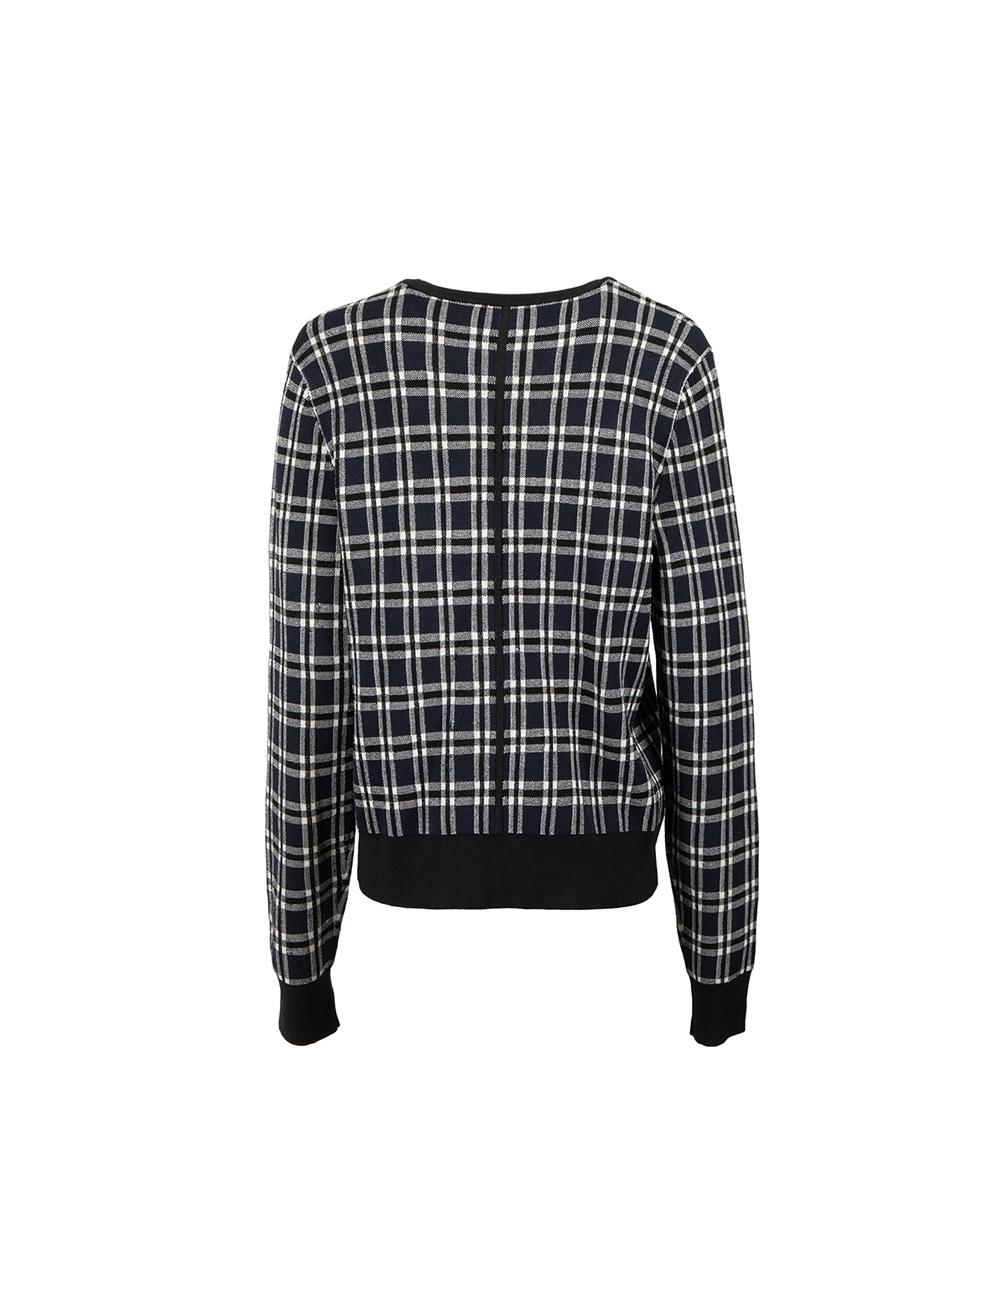 Navy Checkered Pattern Sweatshirt Size L In Good Condition For Sale In London, GB